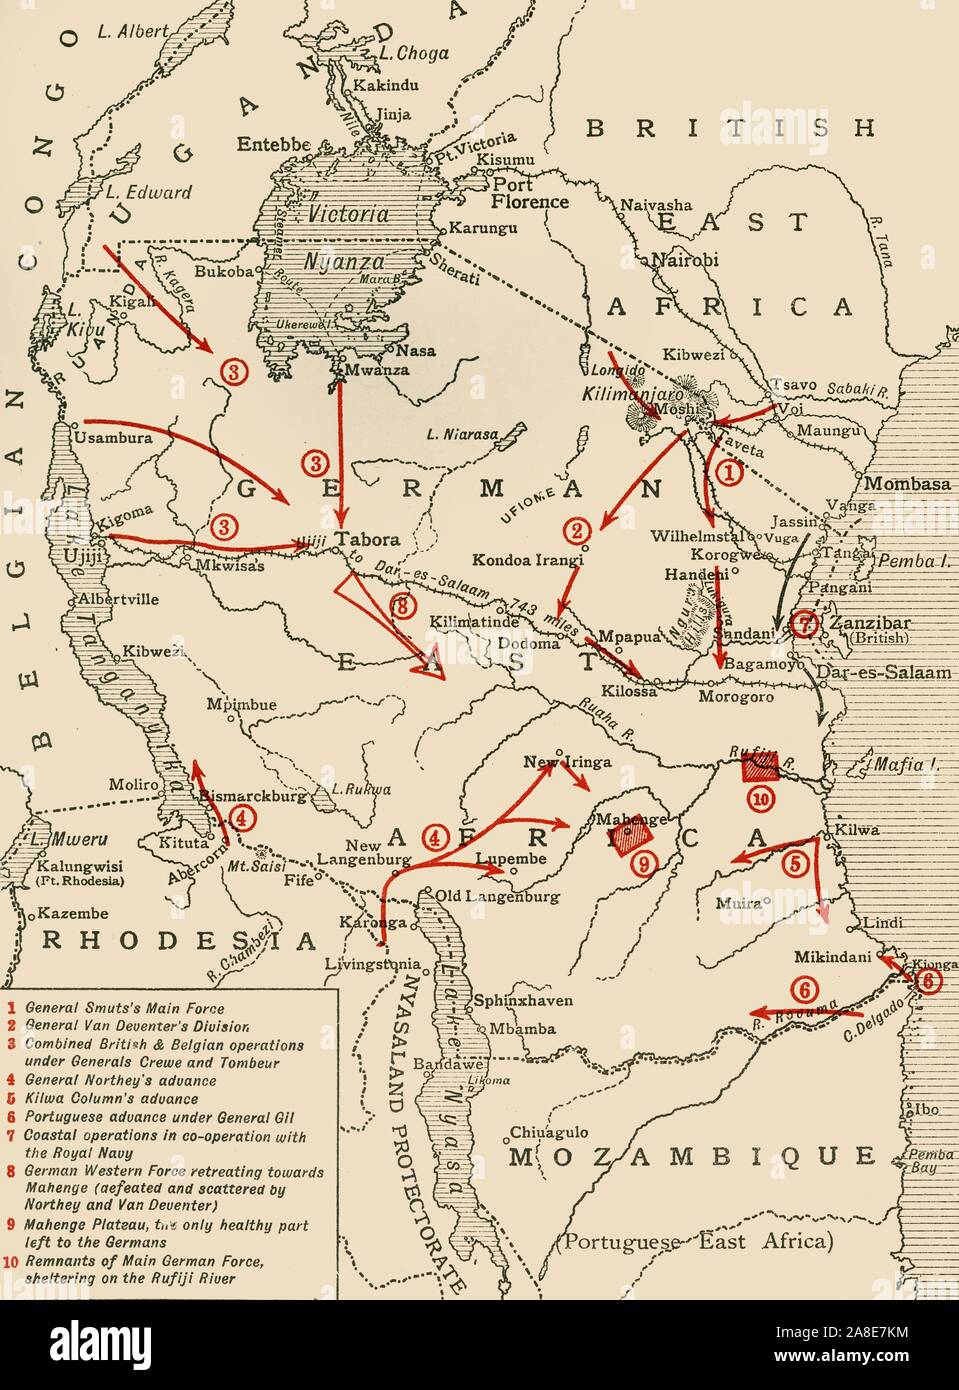 Colonial possessions in East Africa during the First World War, c1916, (c1920). Map showing German East Africa, British East Africa, the Belgian Congo, Rhodesia, Uganda, Nyasaland Protectorate and Mozambique (Portuguese East Africa). Also shown are the various positions of the combatant armies. From &quot;The Great World War: A History&quot;, Volume VI, edited by Frank A Mumby. [The Gresham Publishing Company Ltd, London, c1920] Stock Photo